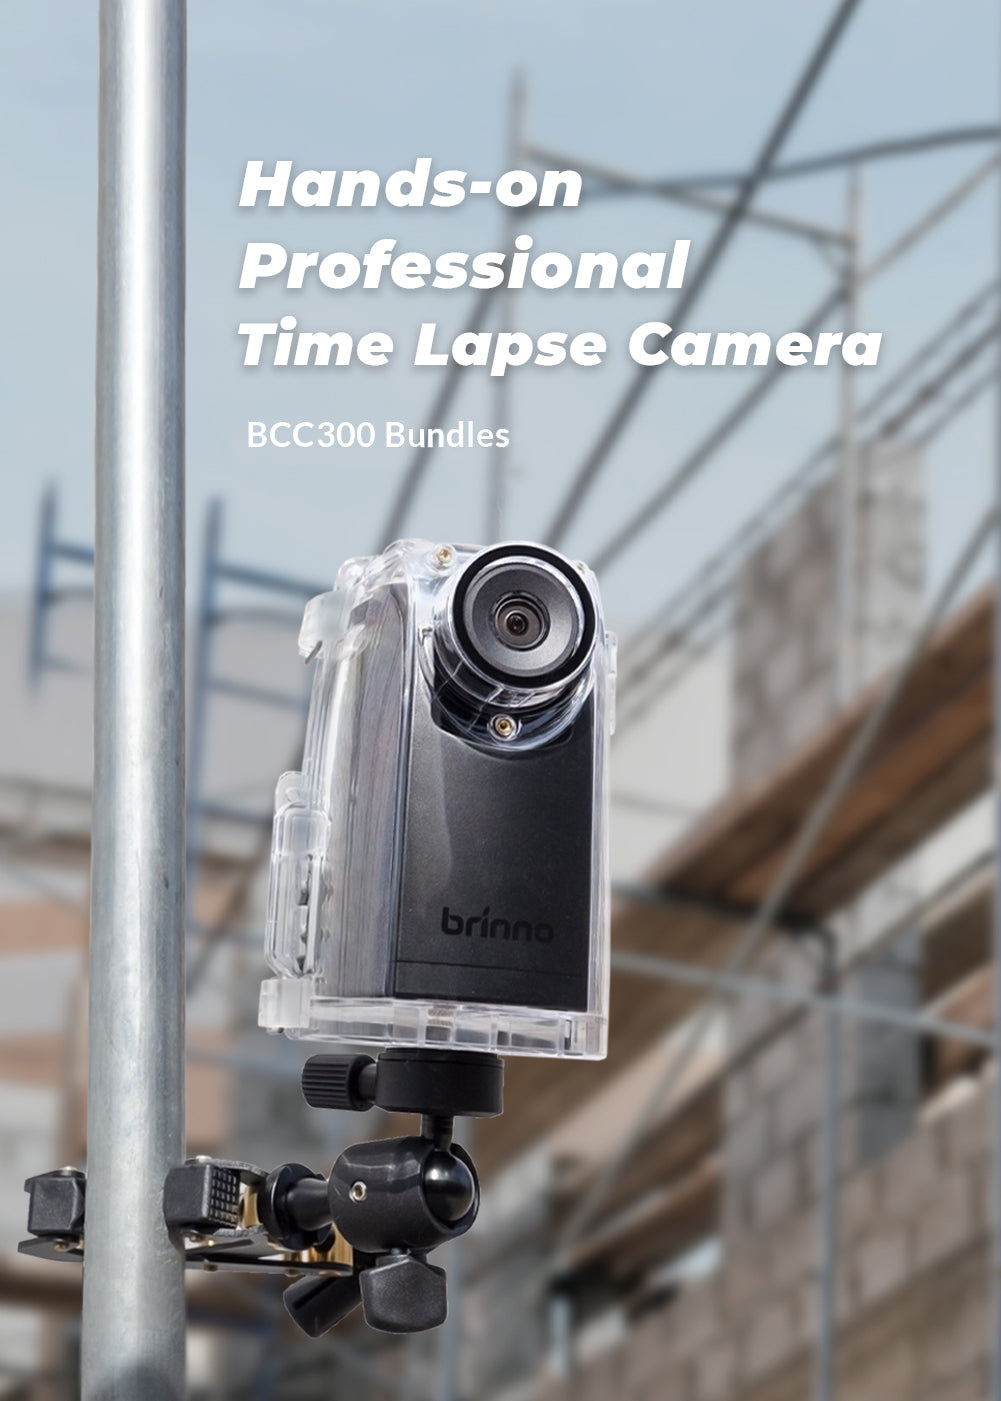 | The world leader lapse cameras